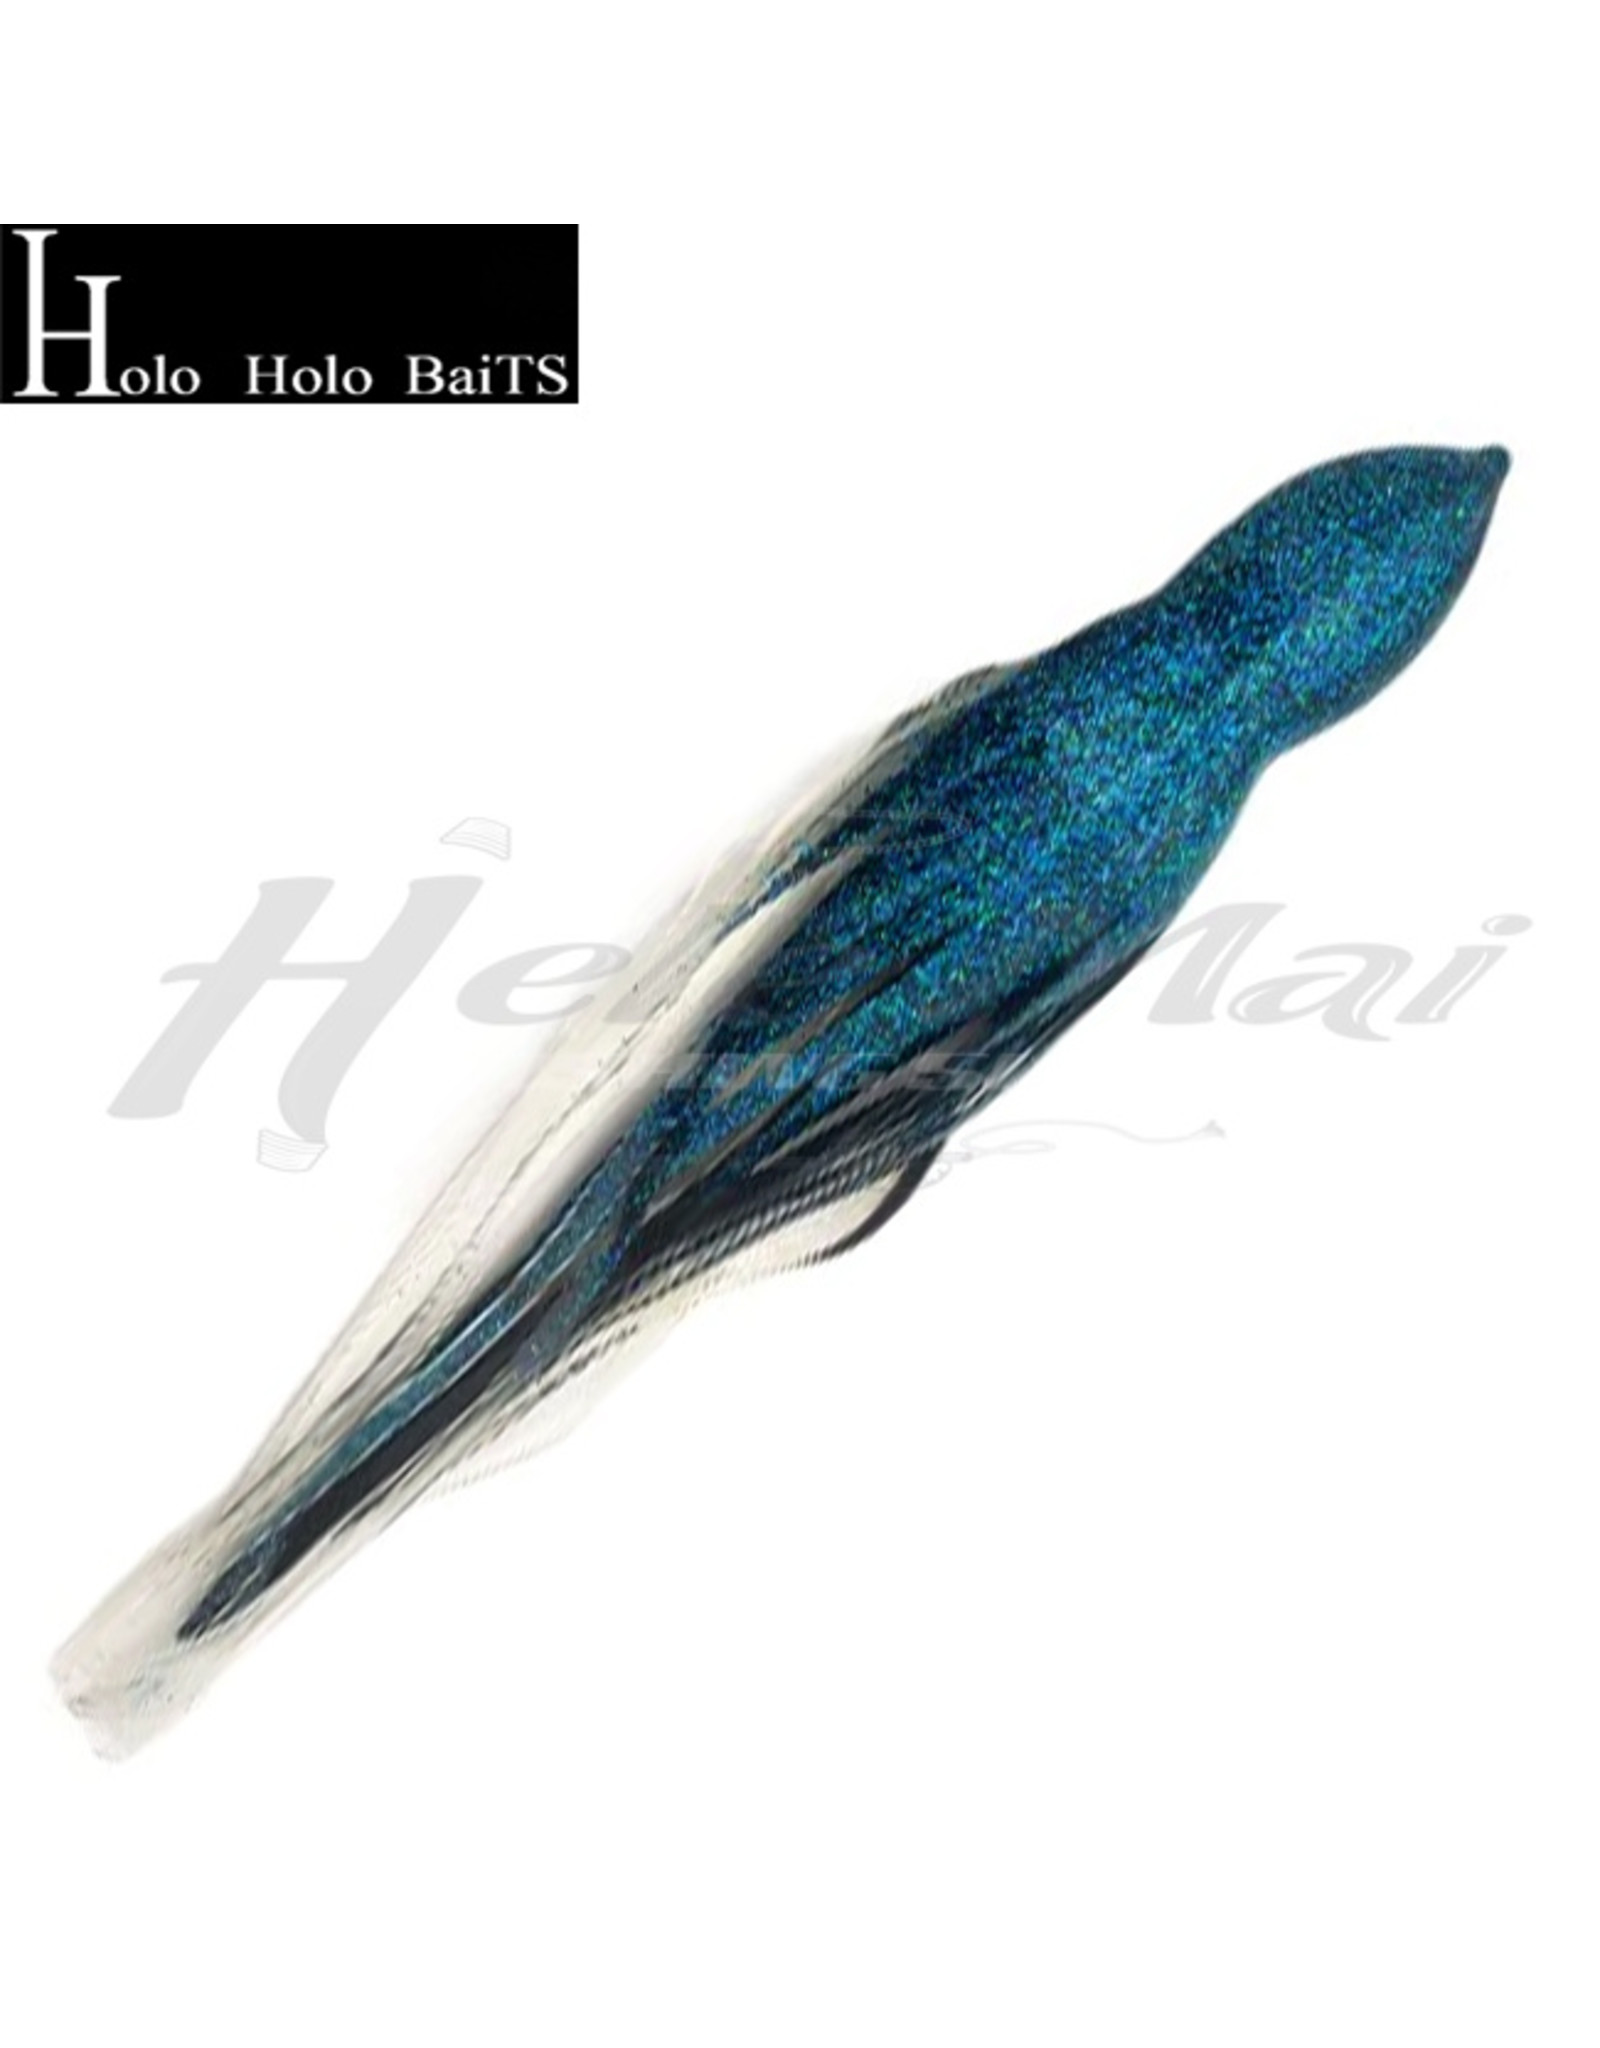 HOLO HOLO HH, 9" SQUID SKIRT NEW CLEAR BLACK GREEN BLUE GLITTER